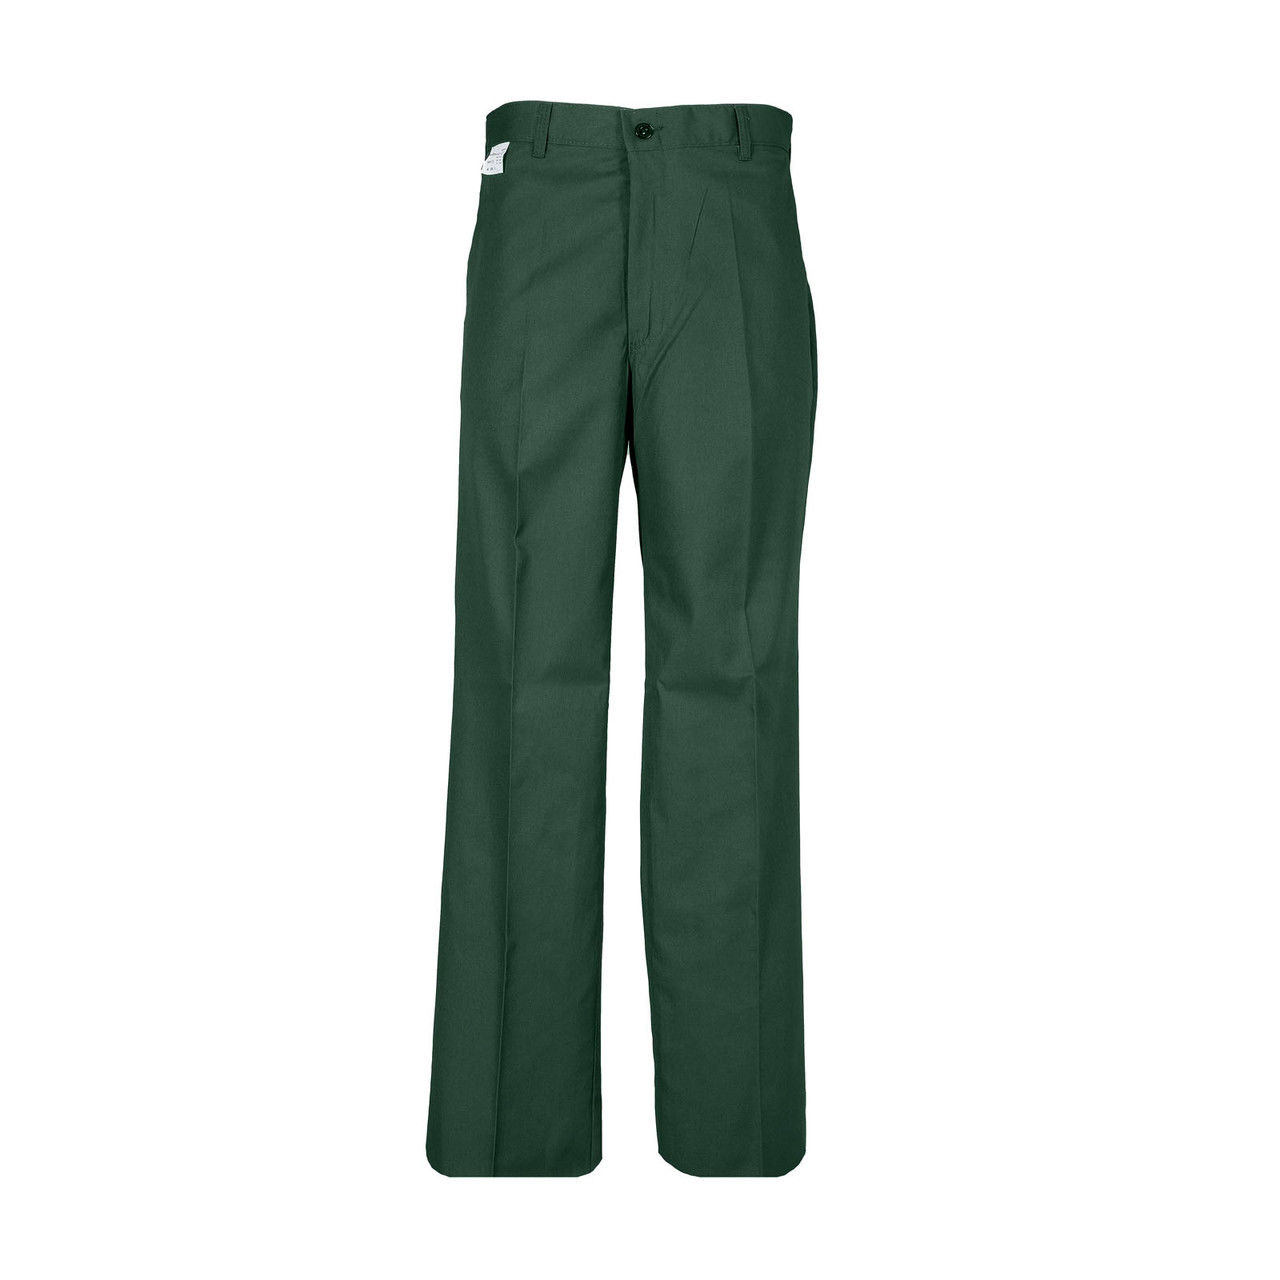 What are the features of the green work pants?